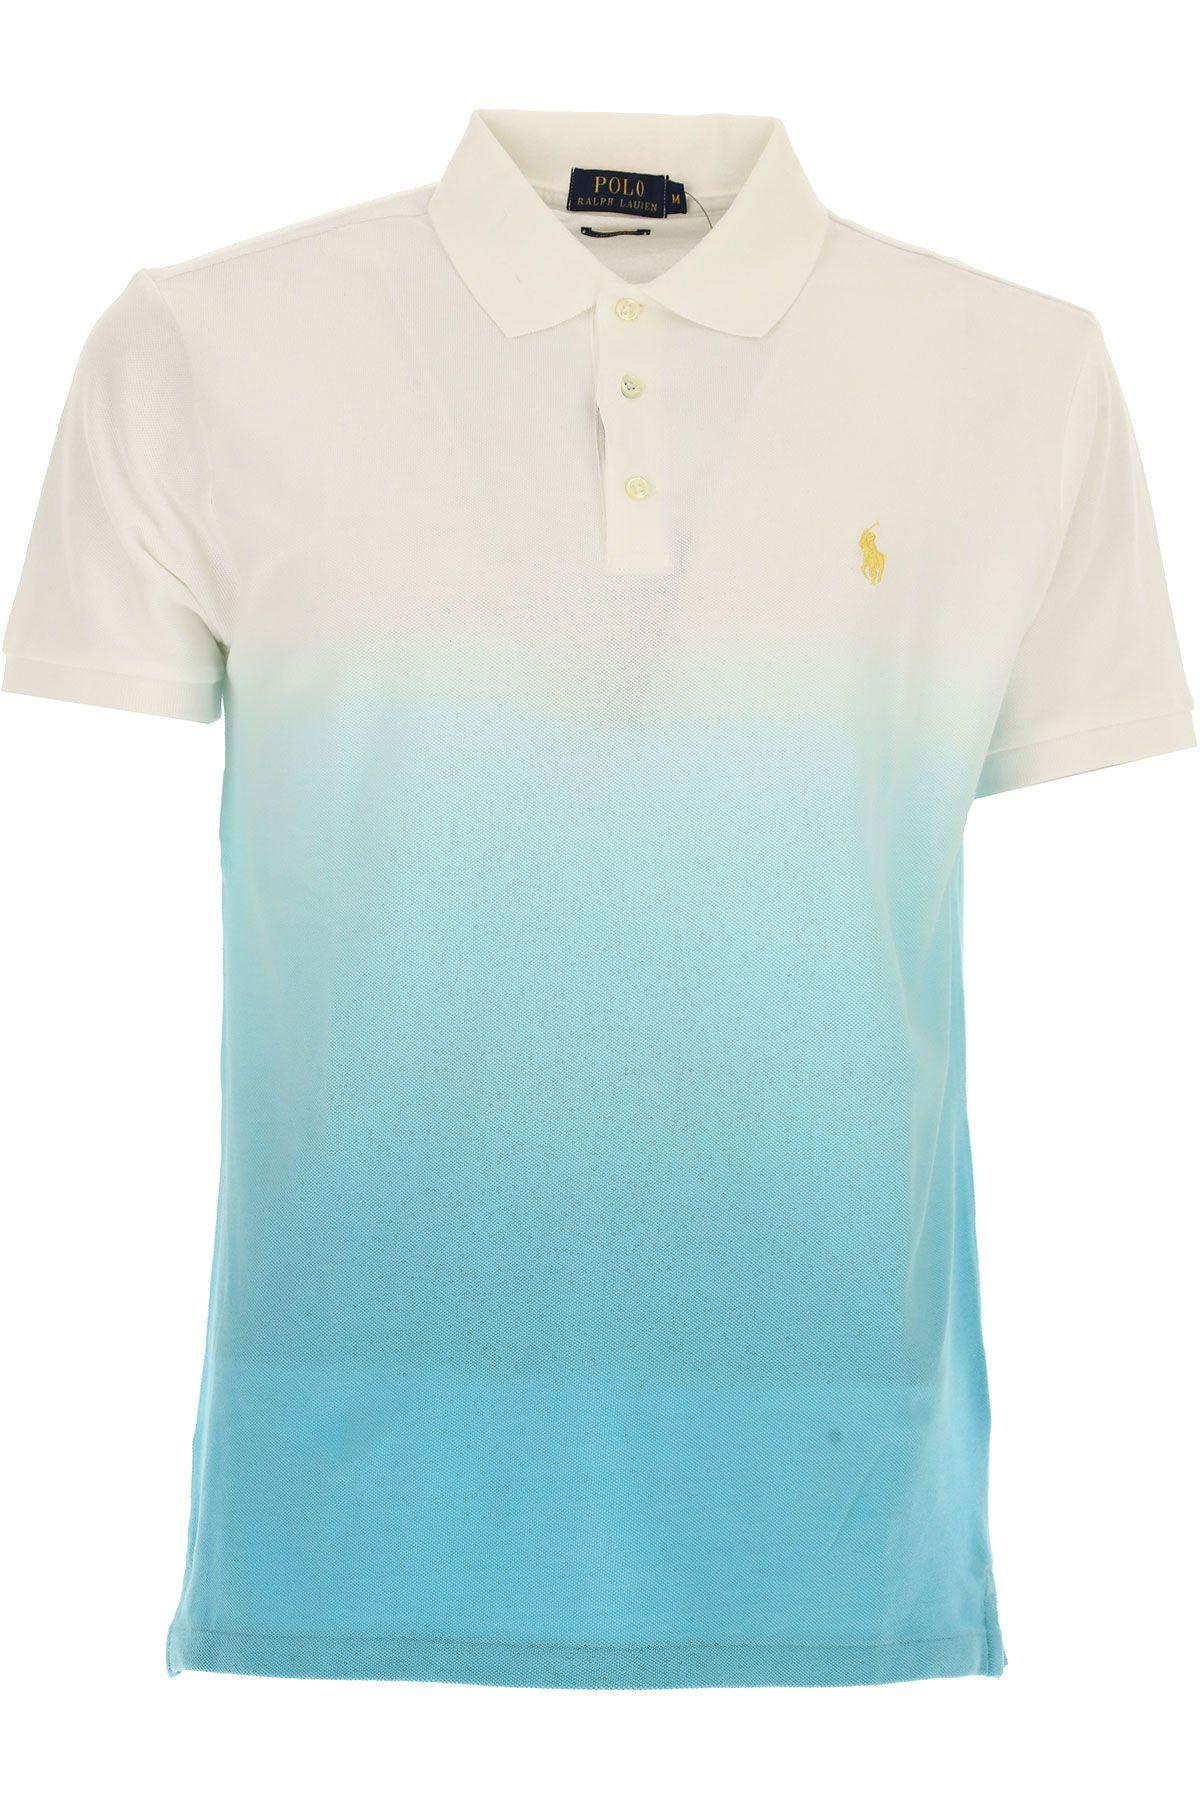 White and Blue Polo Logo - Ralph Lauren Clothing for Men White•Other colors:AzureSky Blue Polo ...